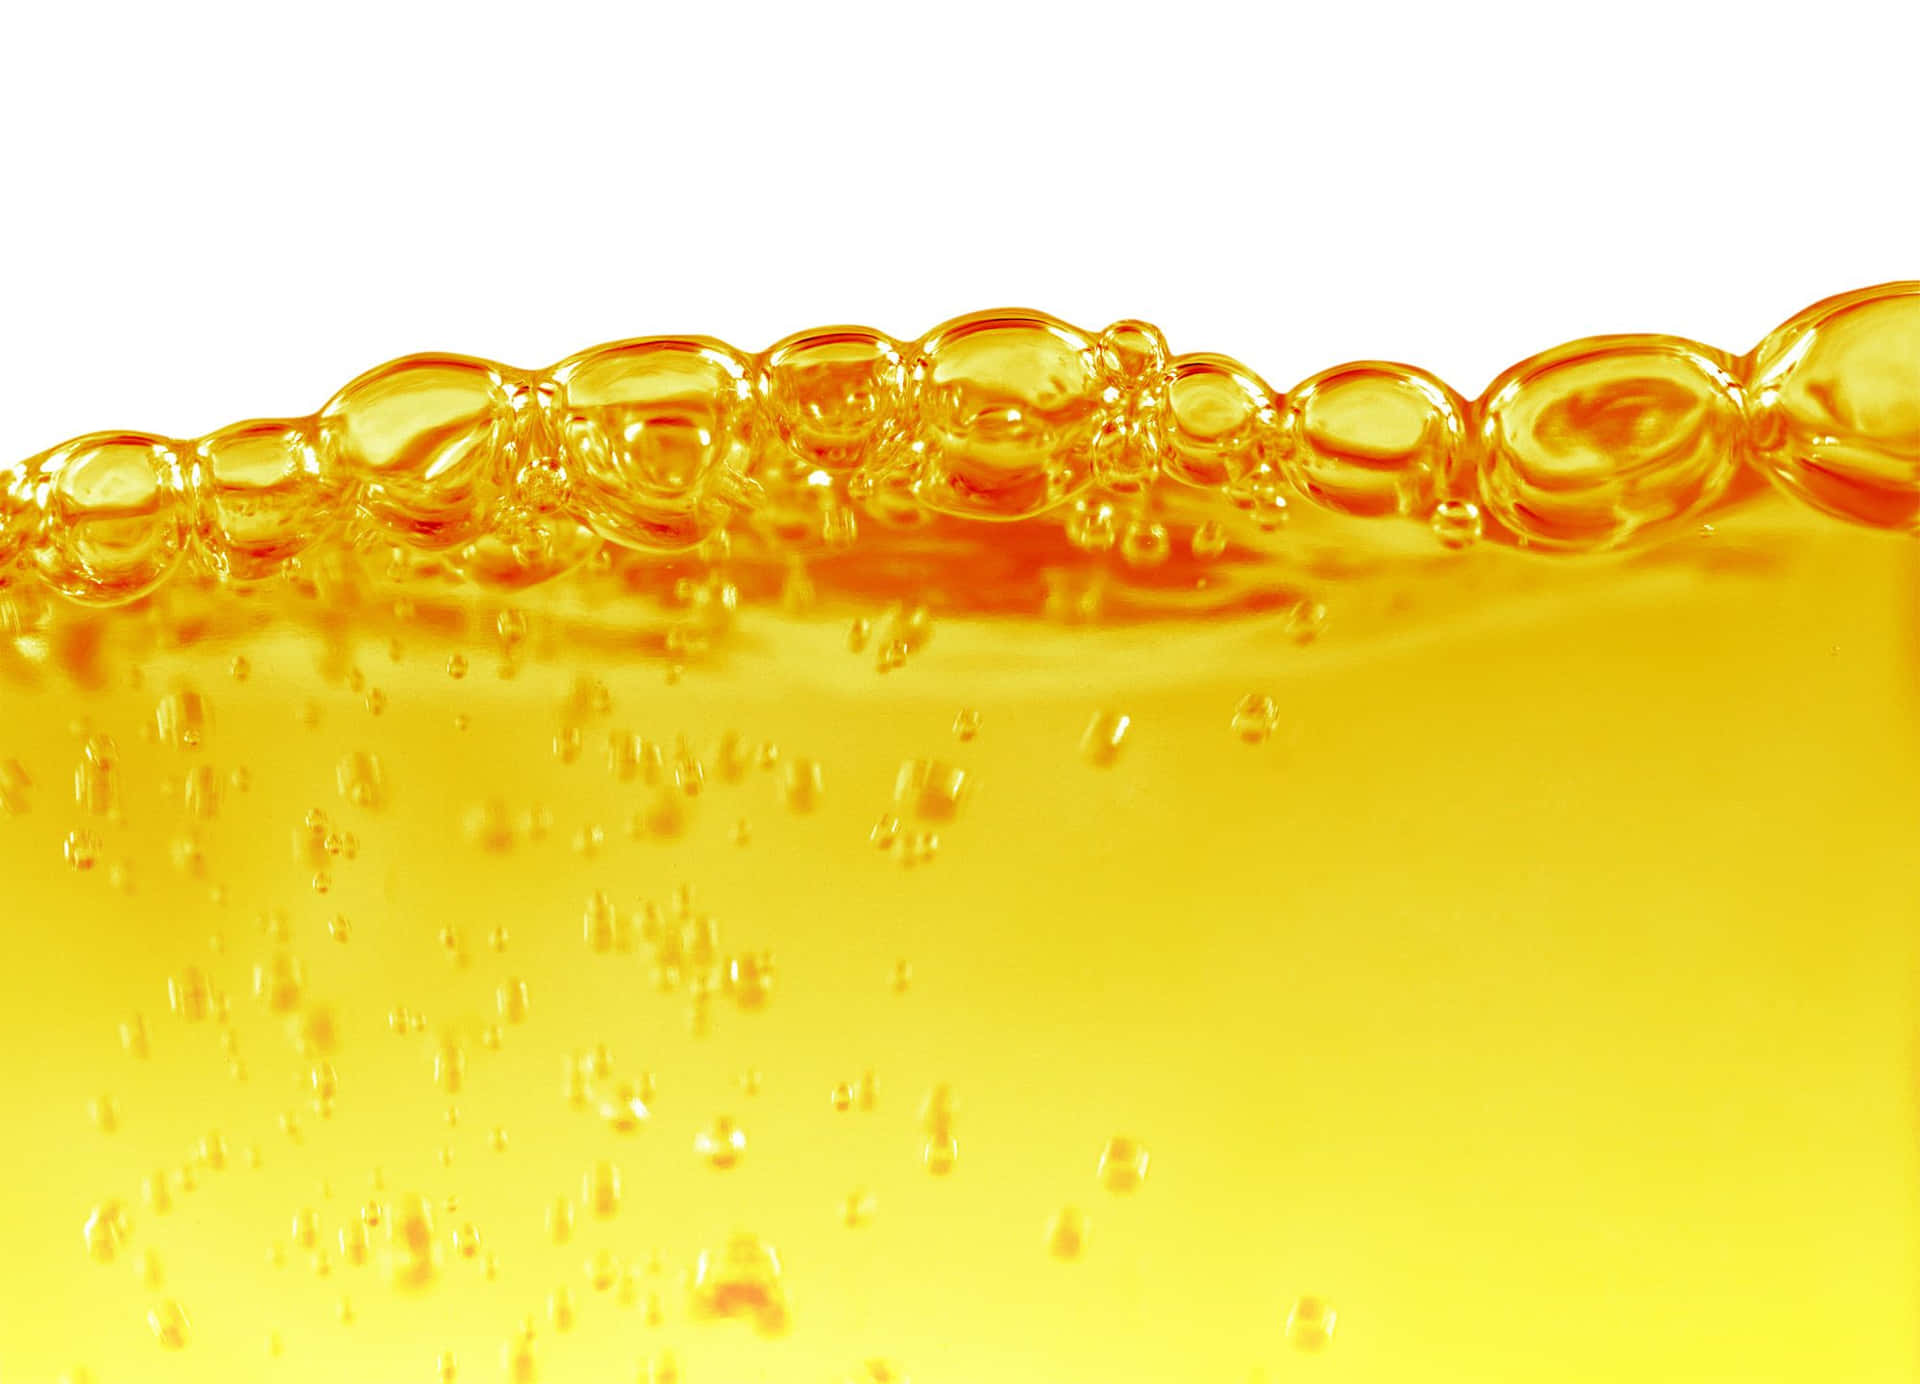 A Yellow Liquid With Bubbles